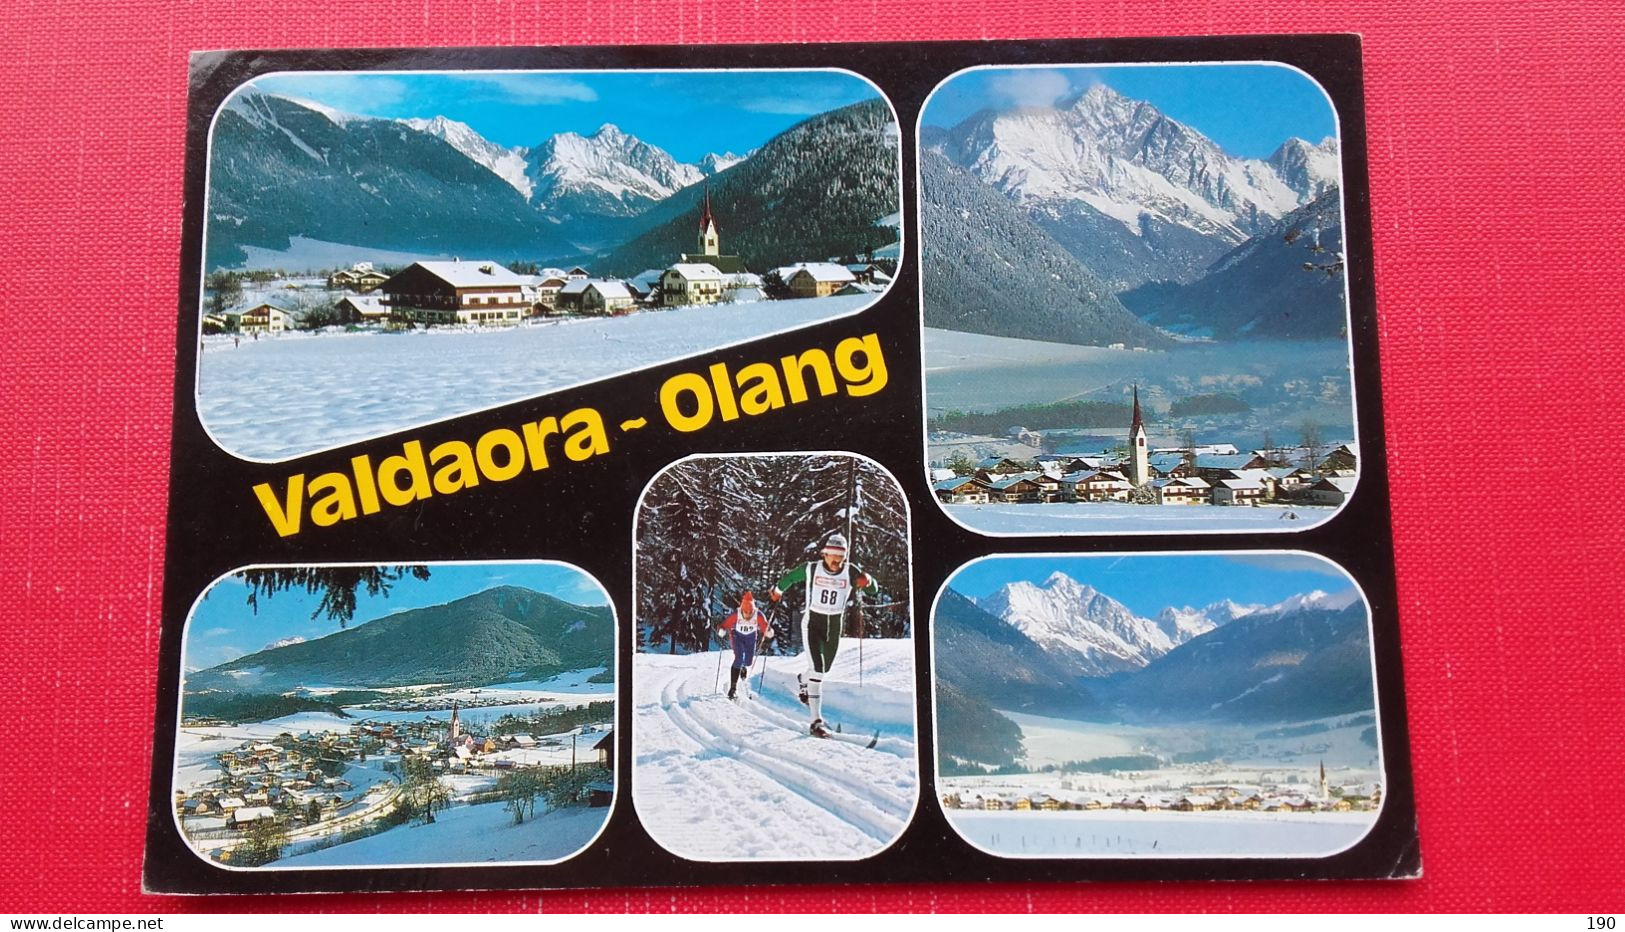 Valdaora-Olang.Cross-country Skiing - Sports D'hiver